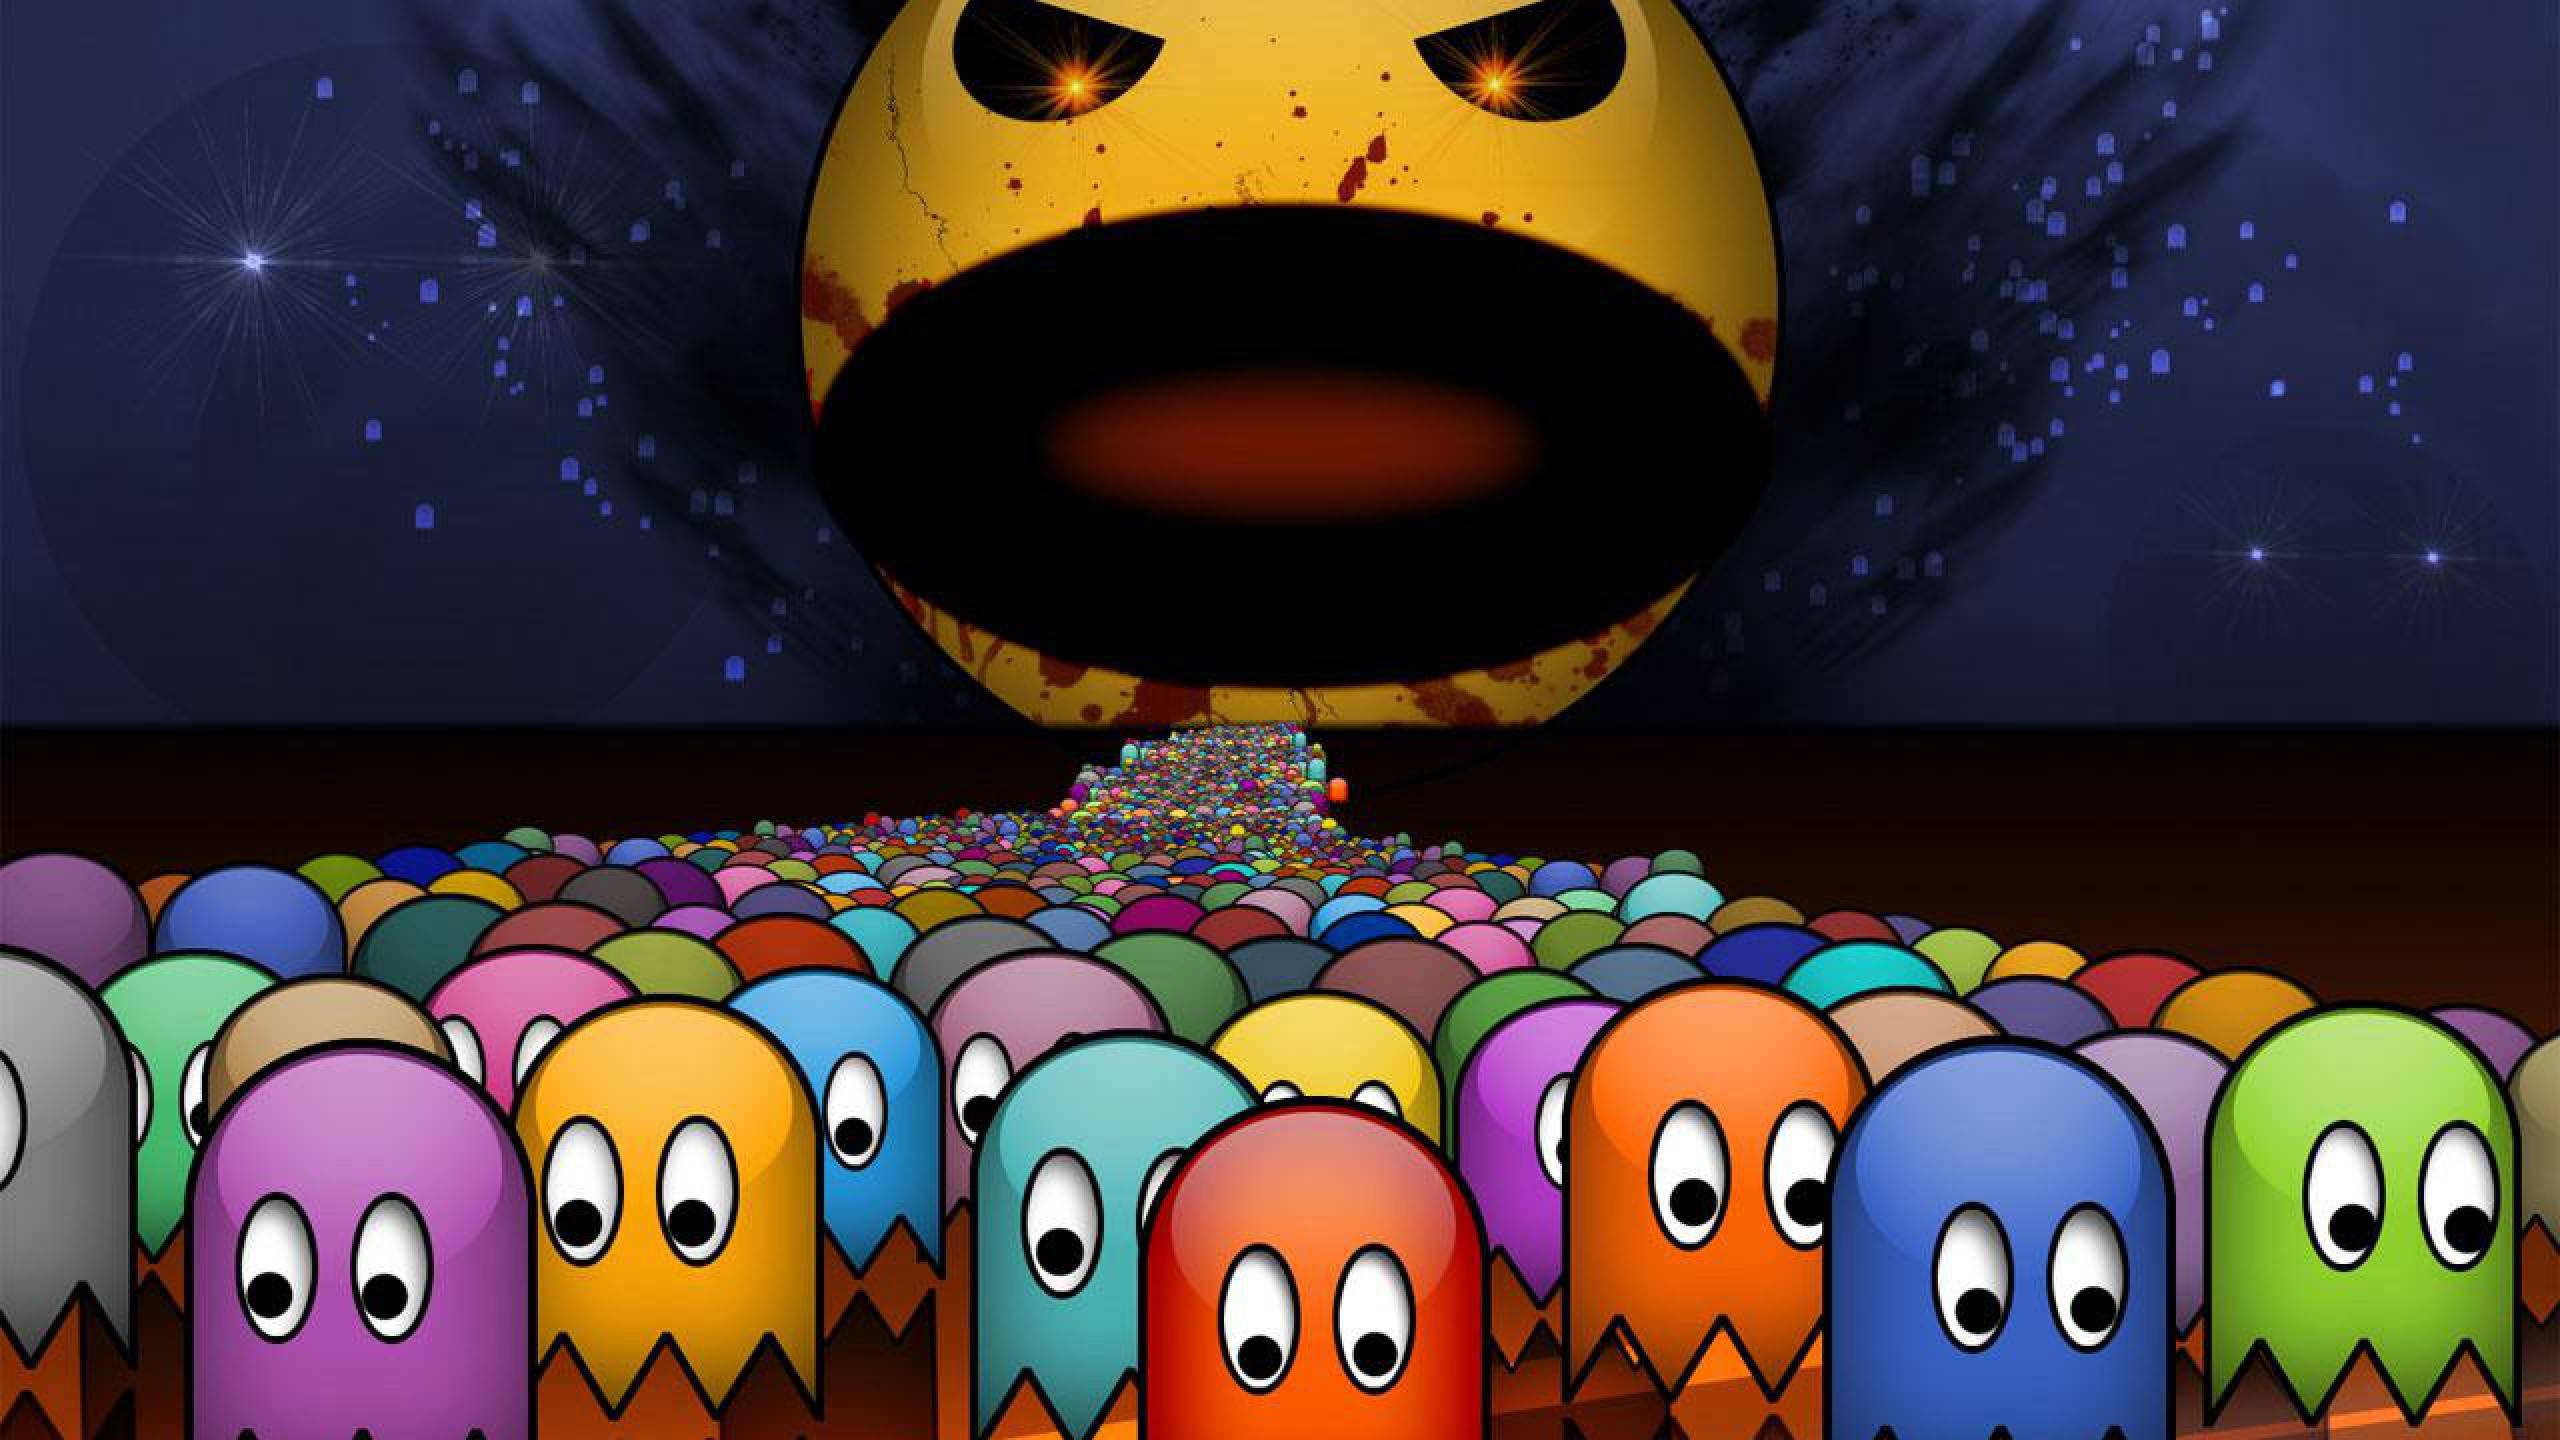 General 2560x1440 video games Pac-Man  retro games humor frontal view reverse fan art video game characters